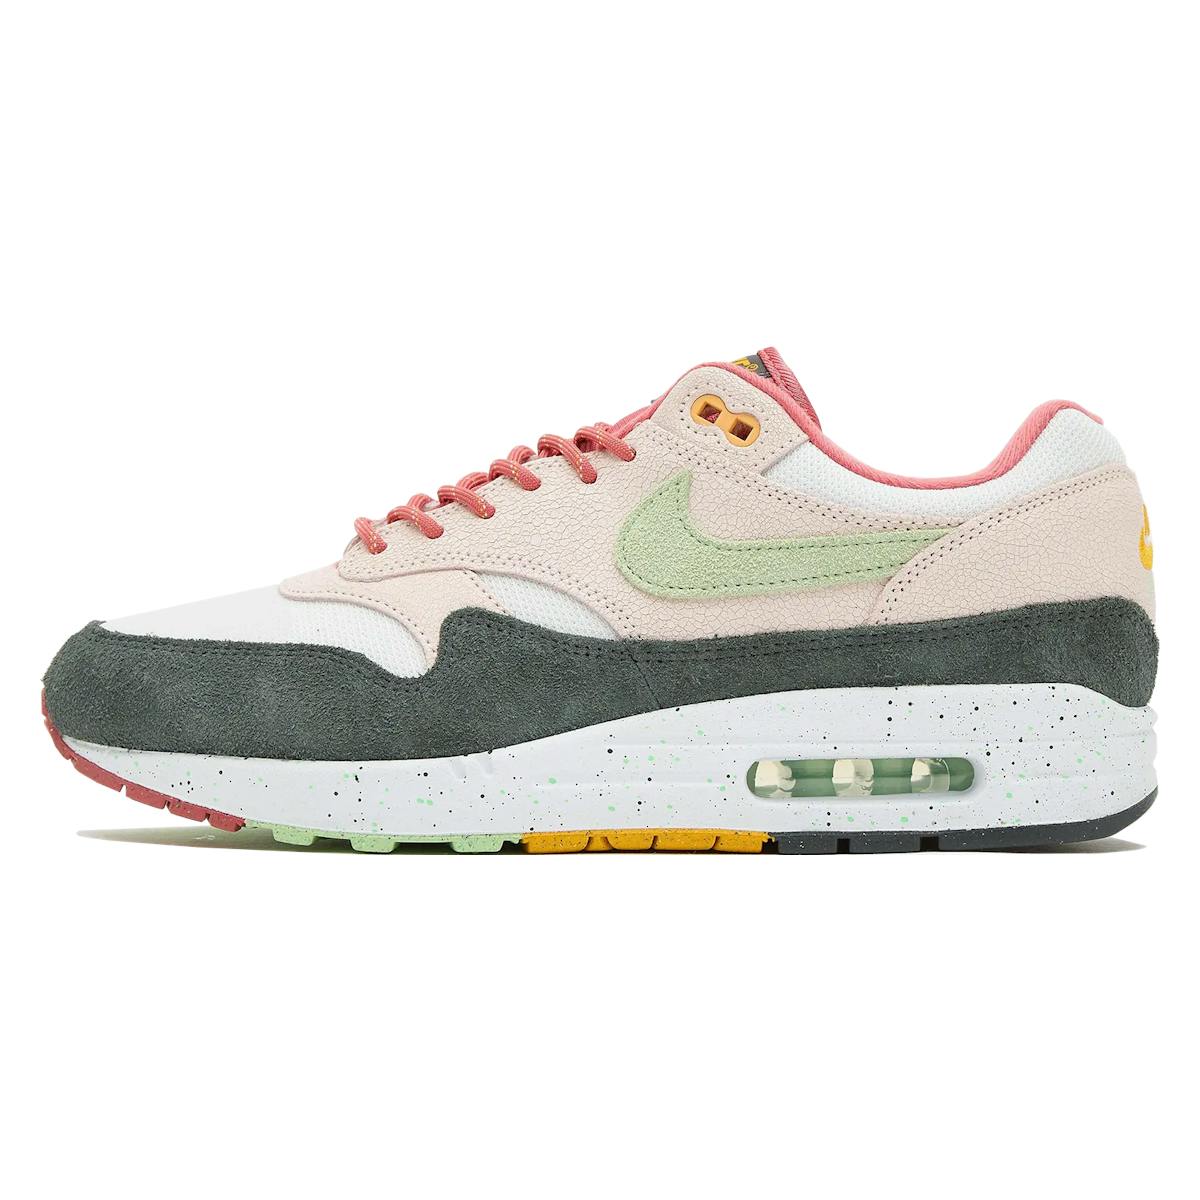 Nike Air Max 1 "Cracked Multi-Color"